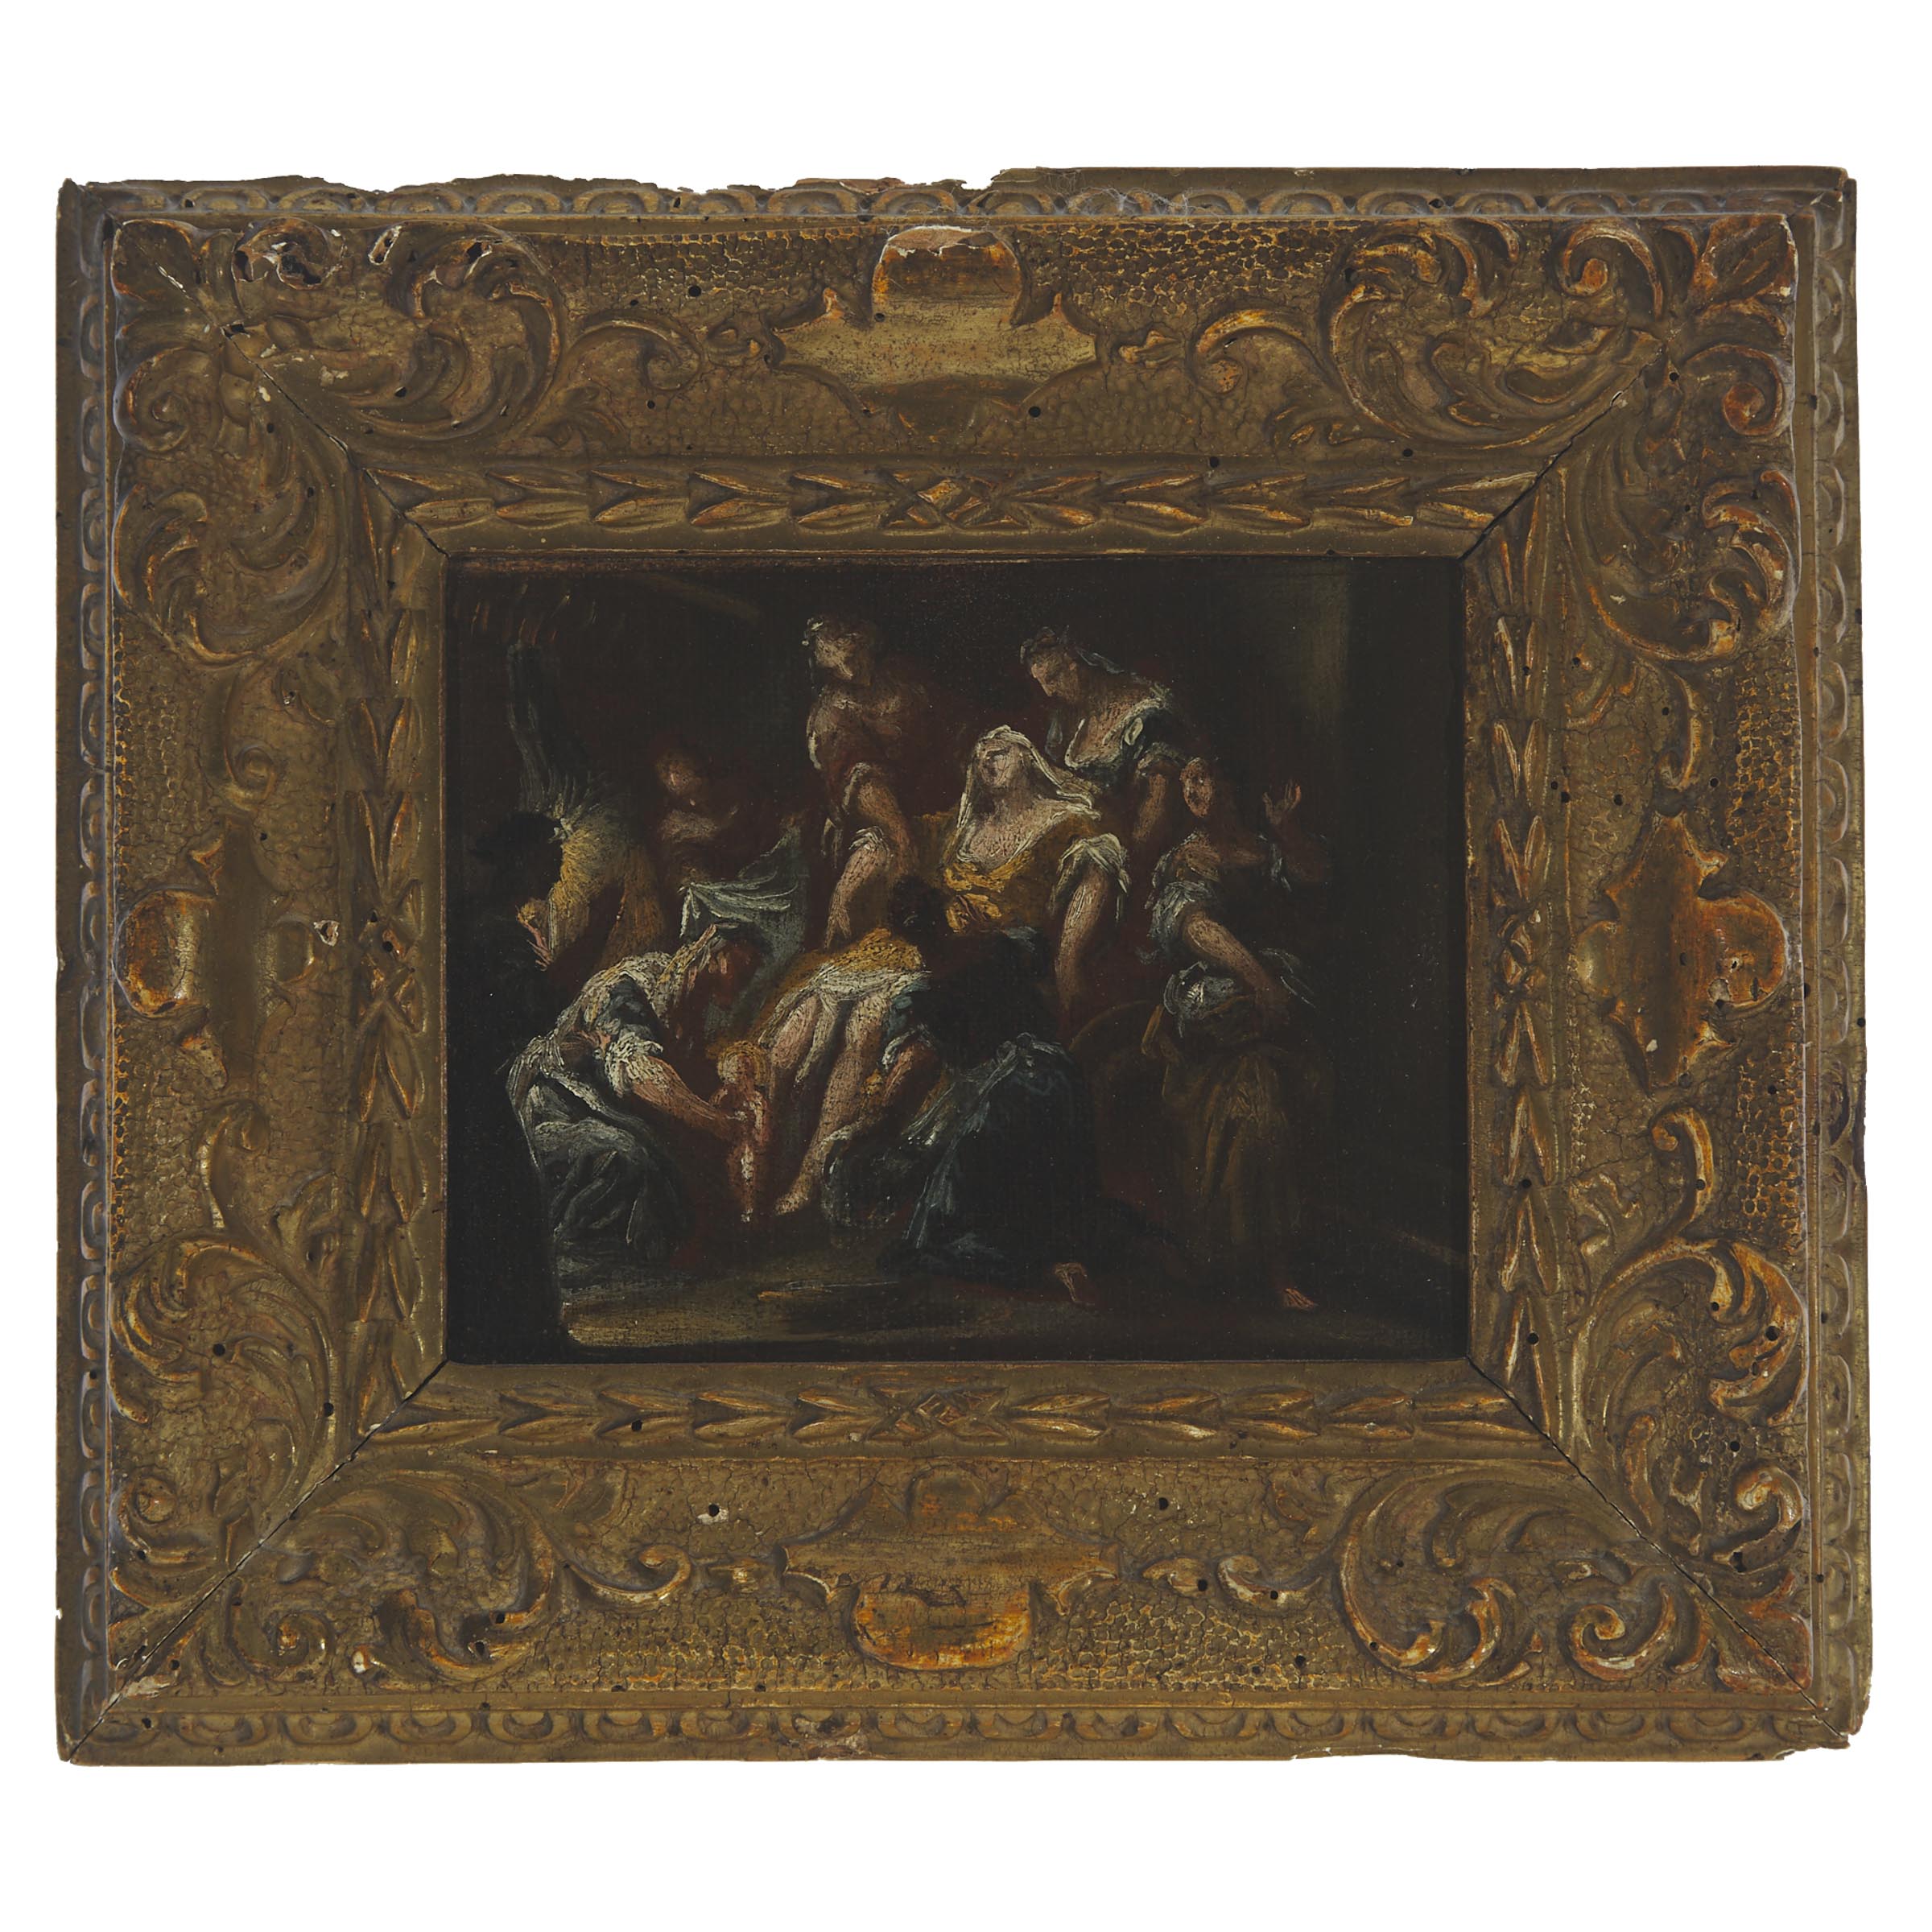 Attributed to Francesco Monti (1685–1768)